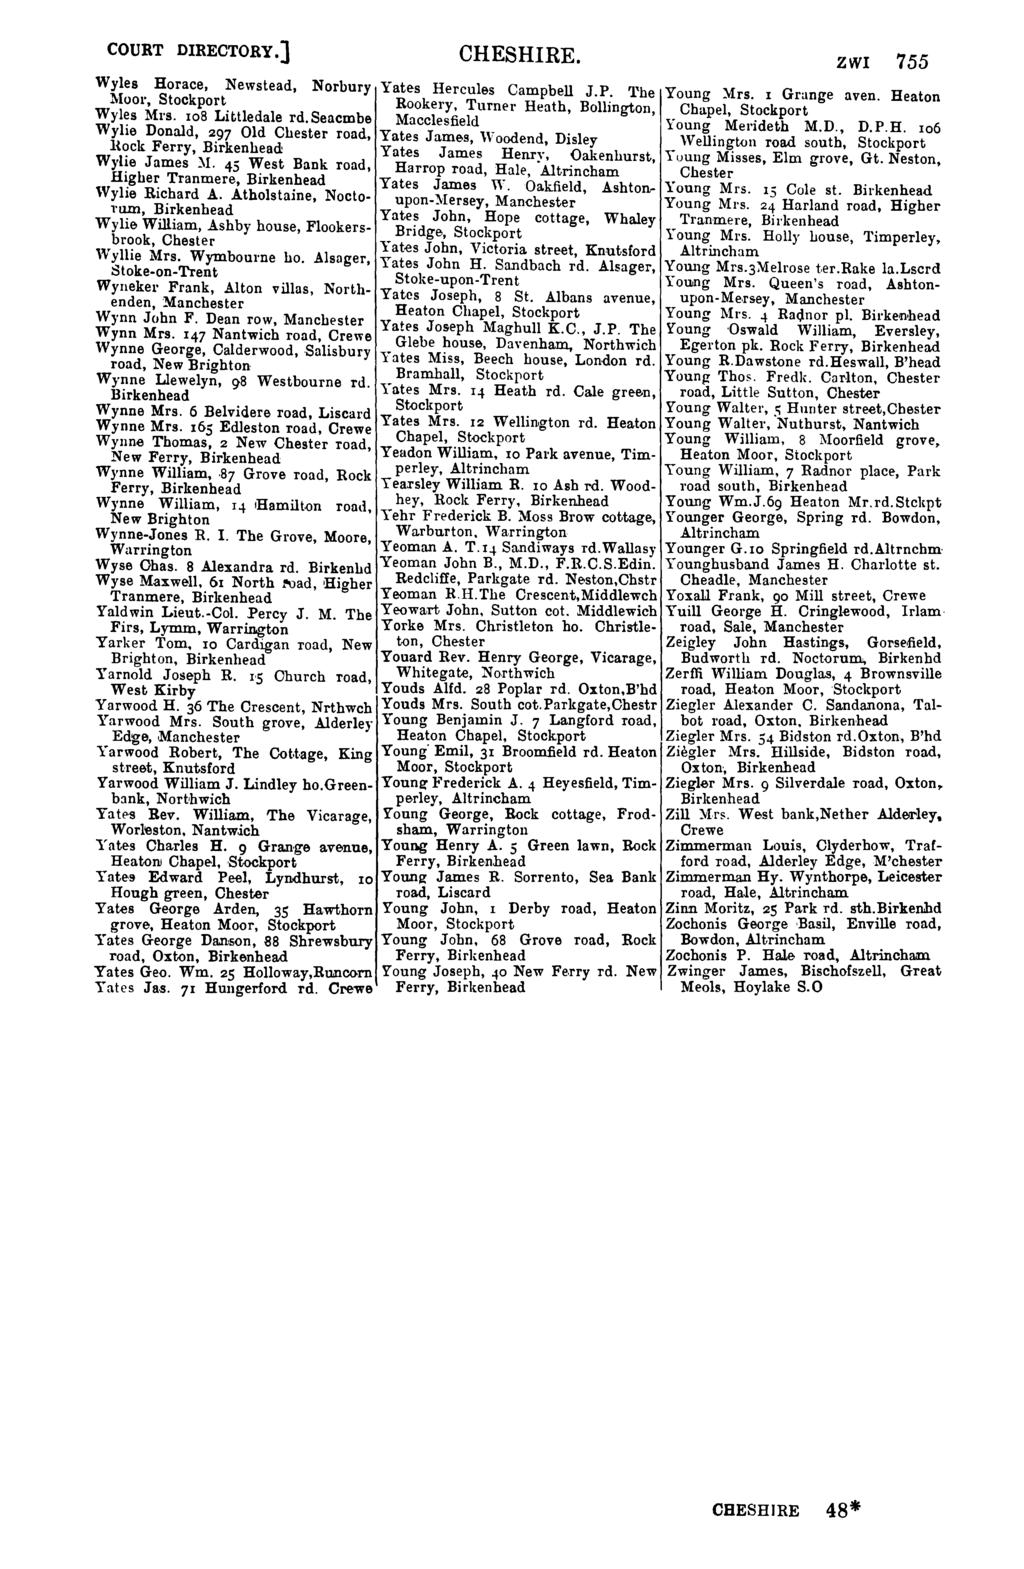 COURT DIRECTORY.] CHESHIRE. ZWI 755 Wyles Horace, Newstead, Norbury Yates Hercules Campbell J P 'l'he Young )Irs. I Grange aven.